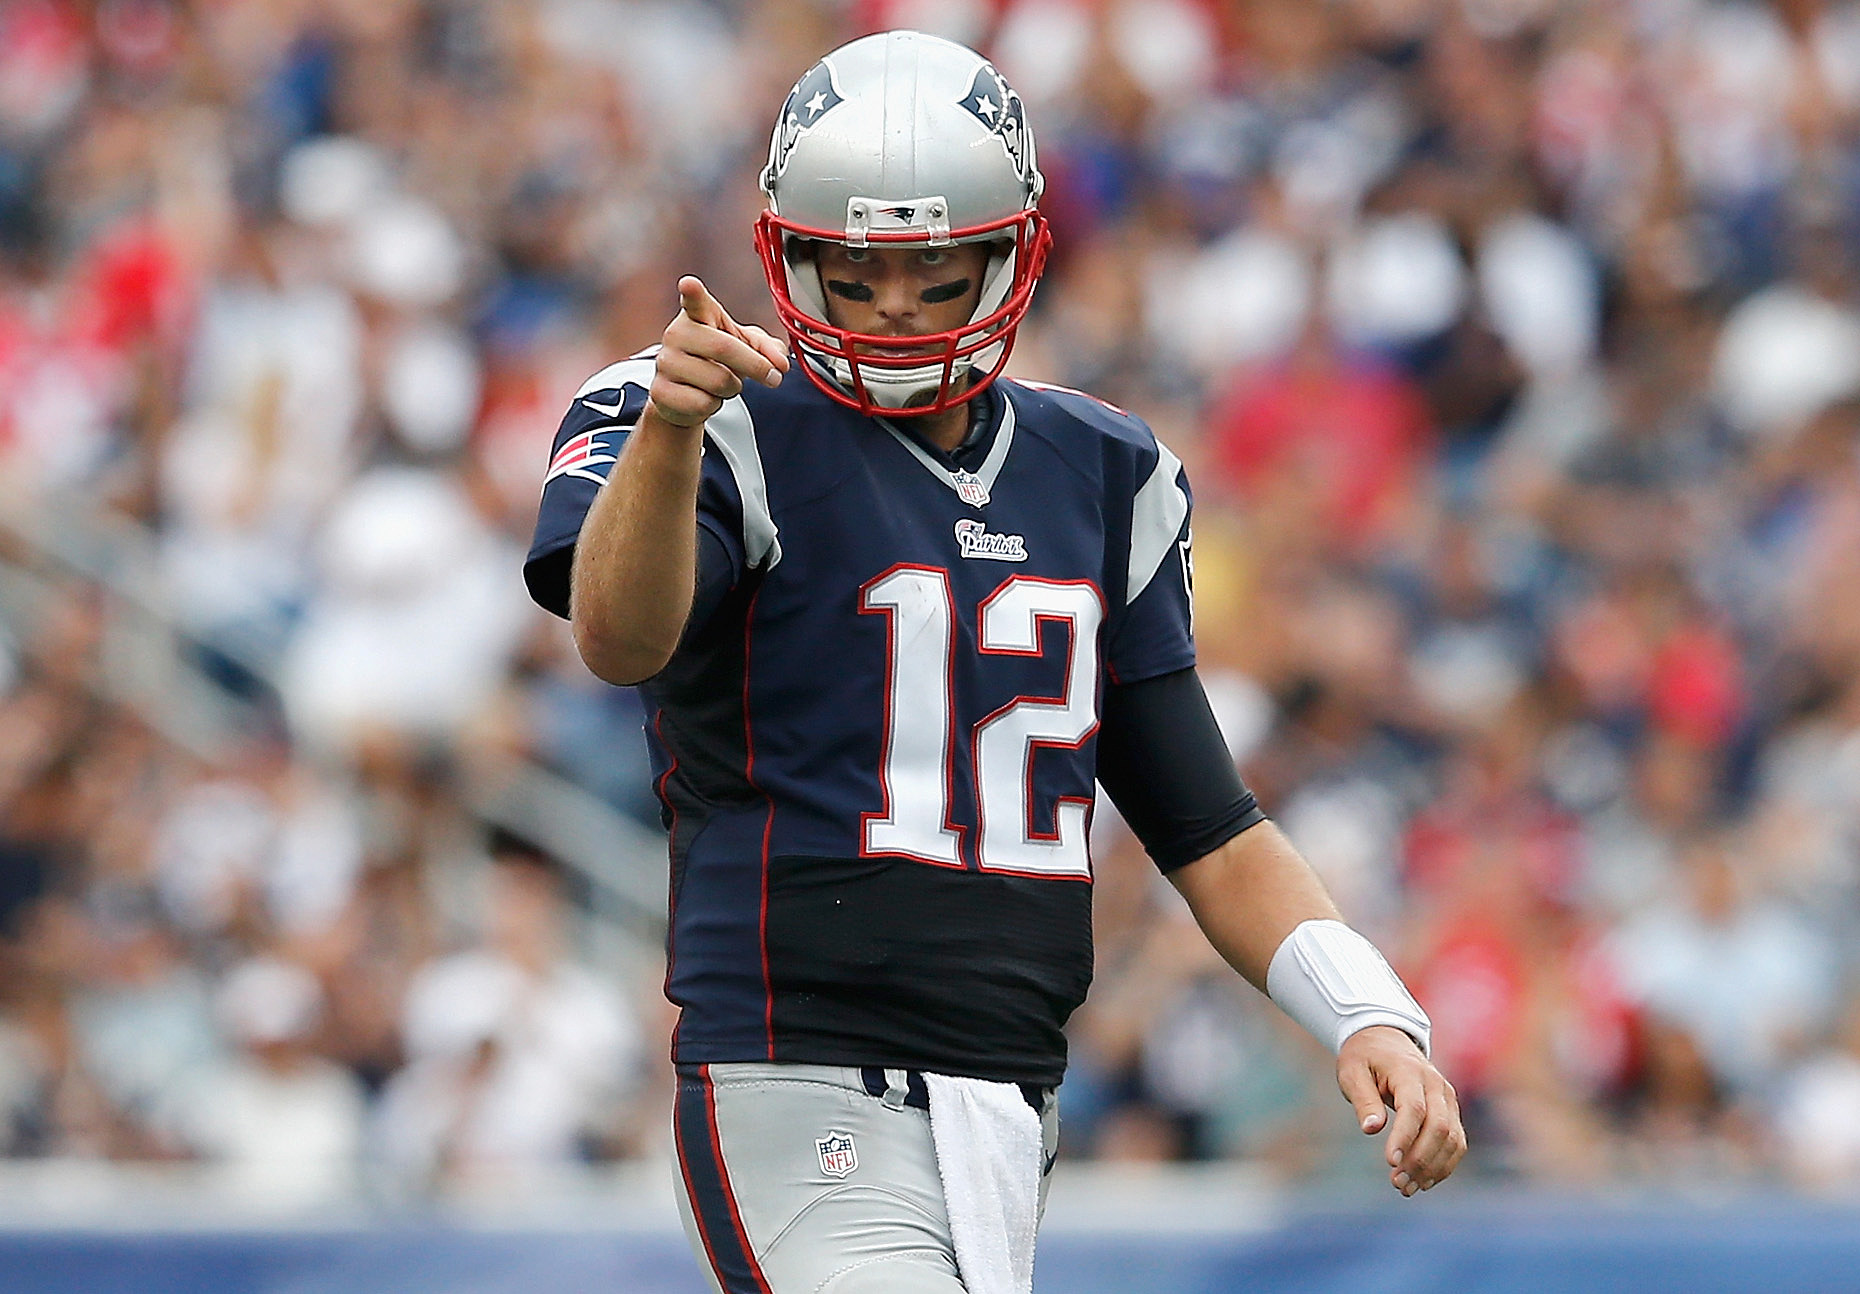 More Mic'd Up Tom Brady From the Broncos Game to Get You Through the Bye  Week [VIDEO]